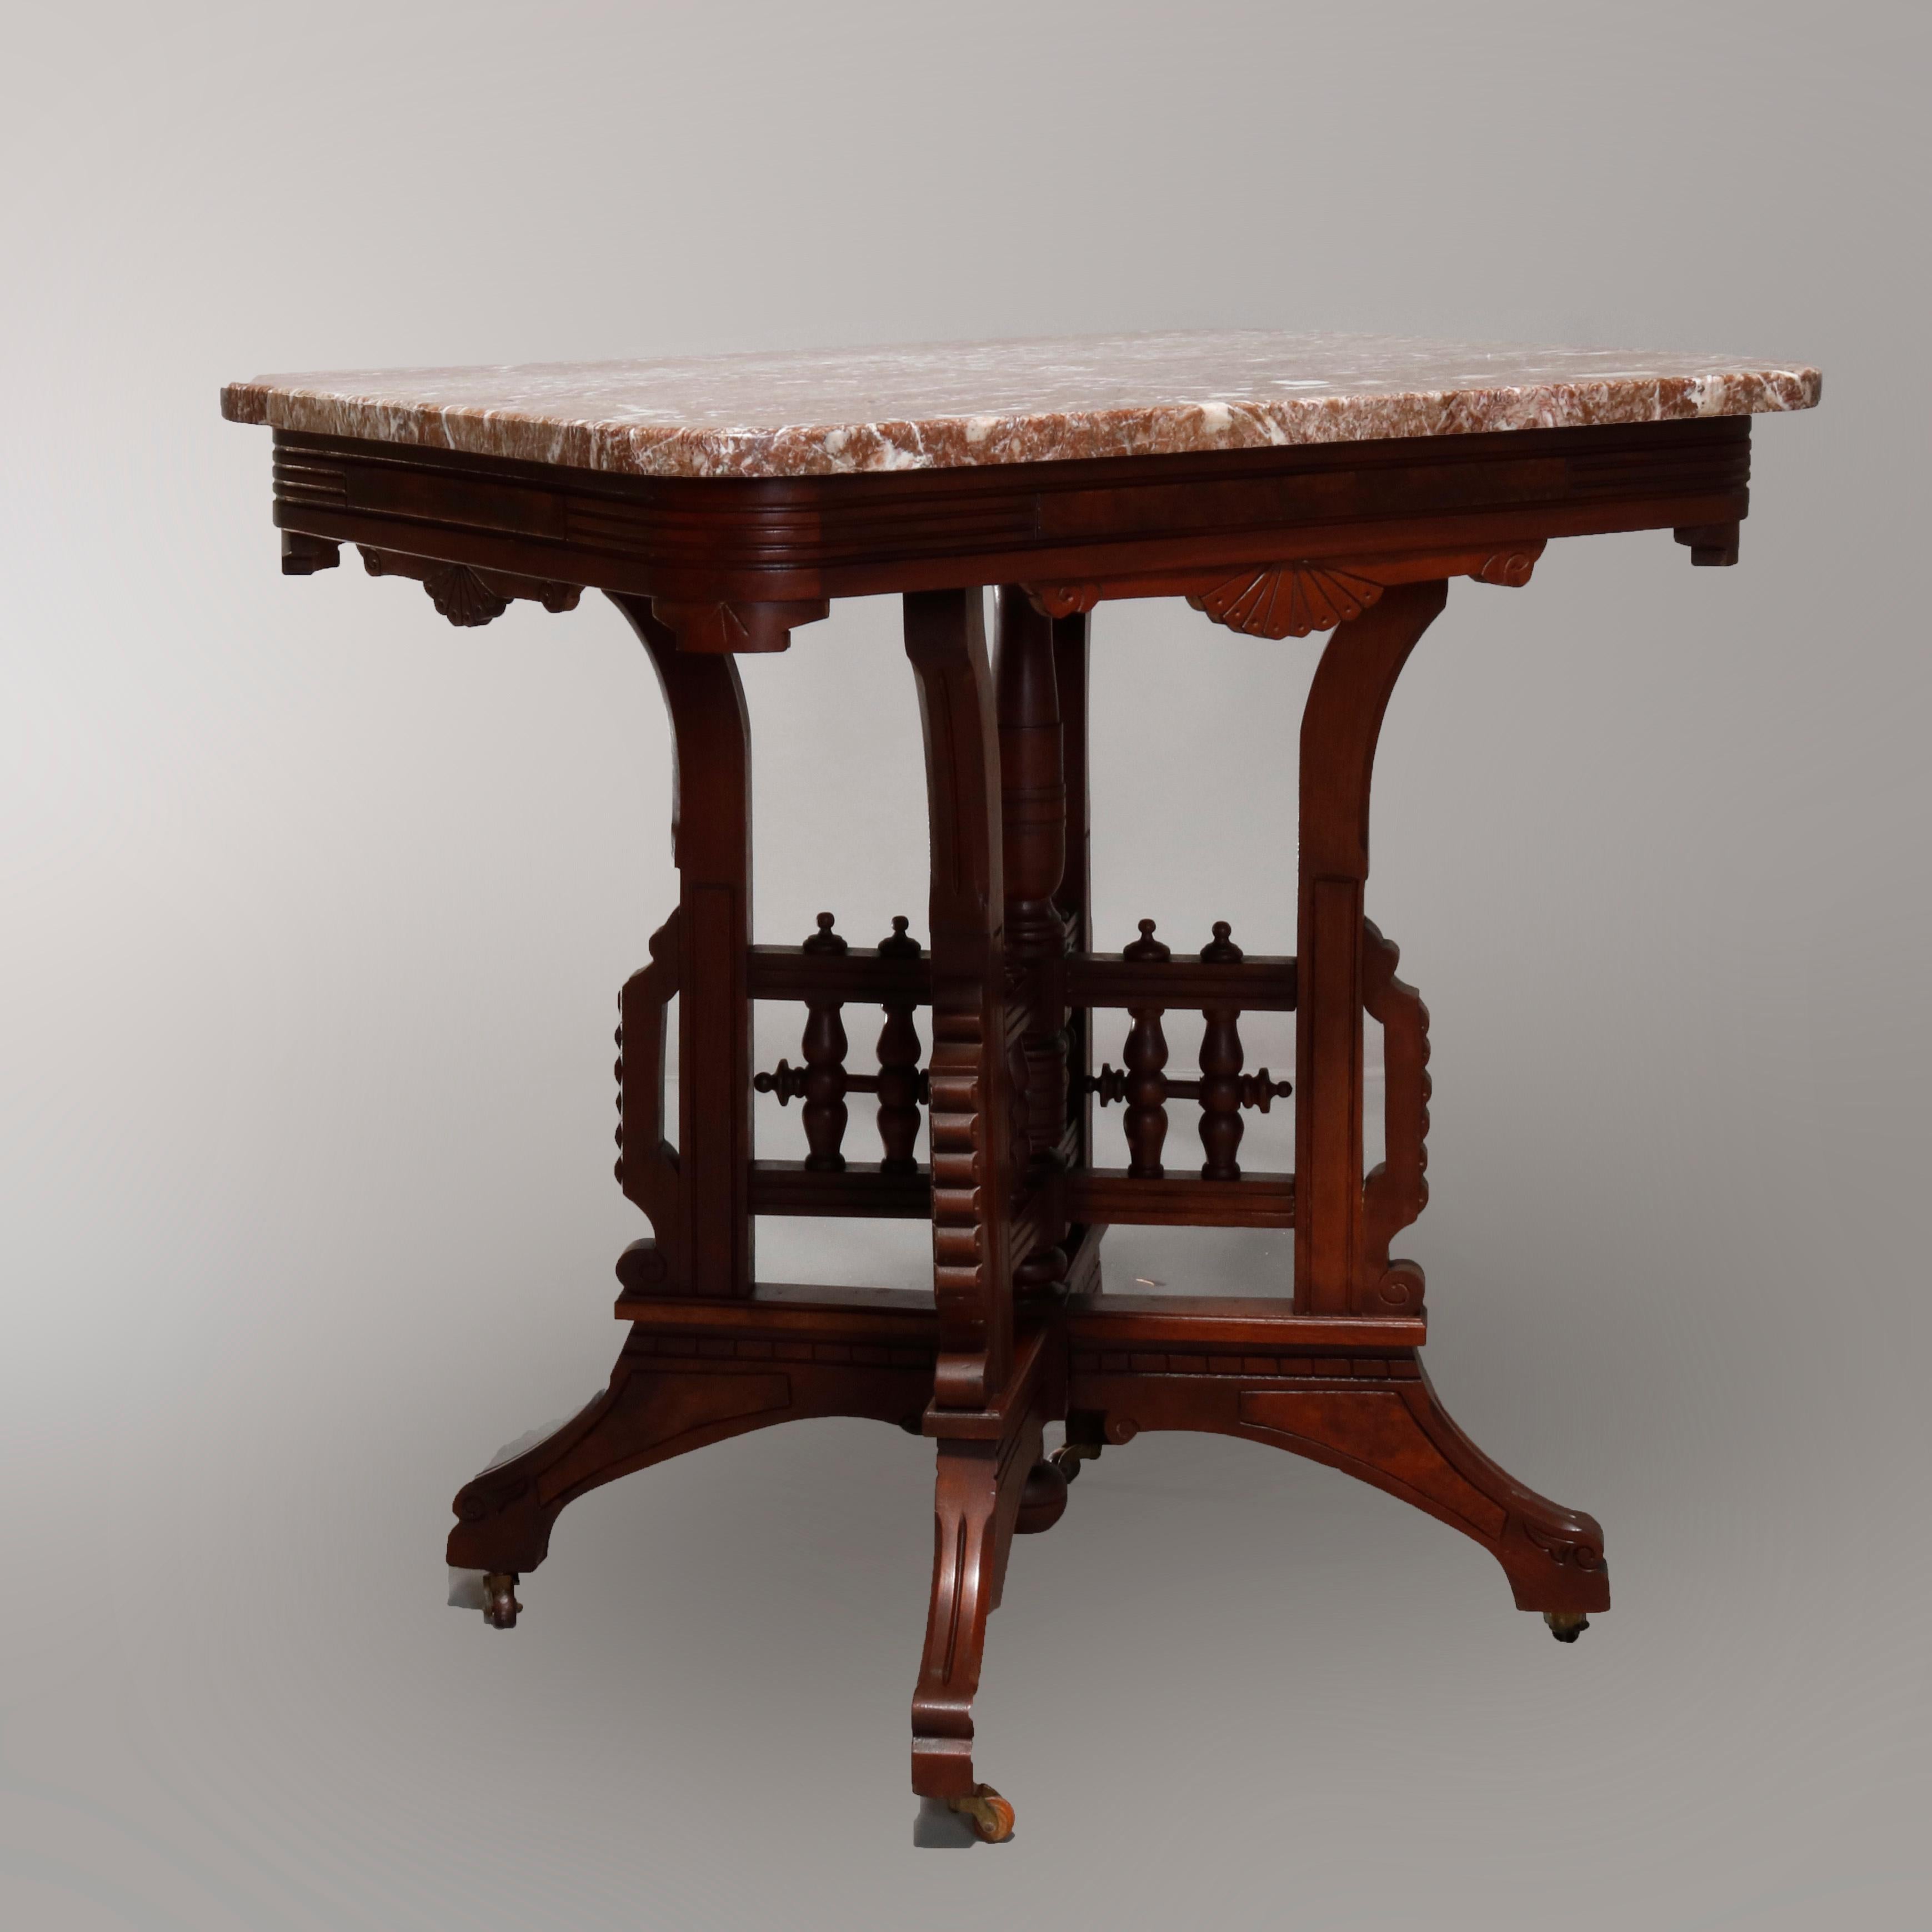 American Antique Eastlake Carved Walnut Burl and Rouge Marble-Top Parlor Table circa 1890